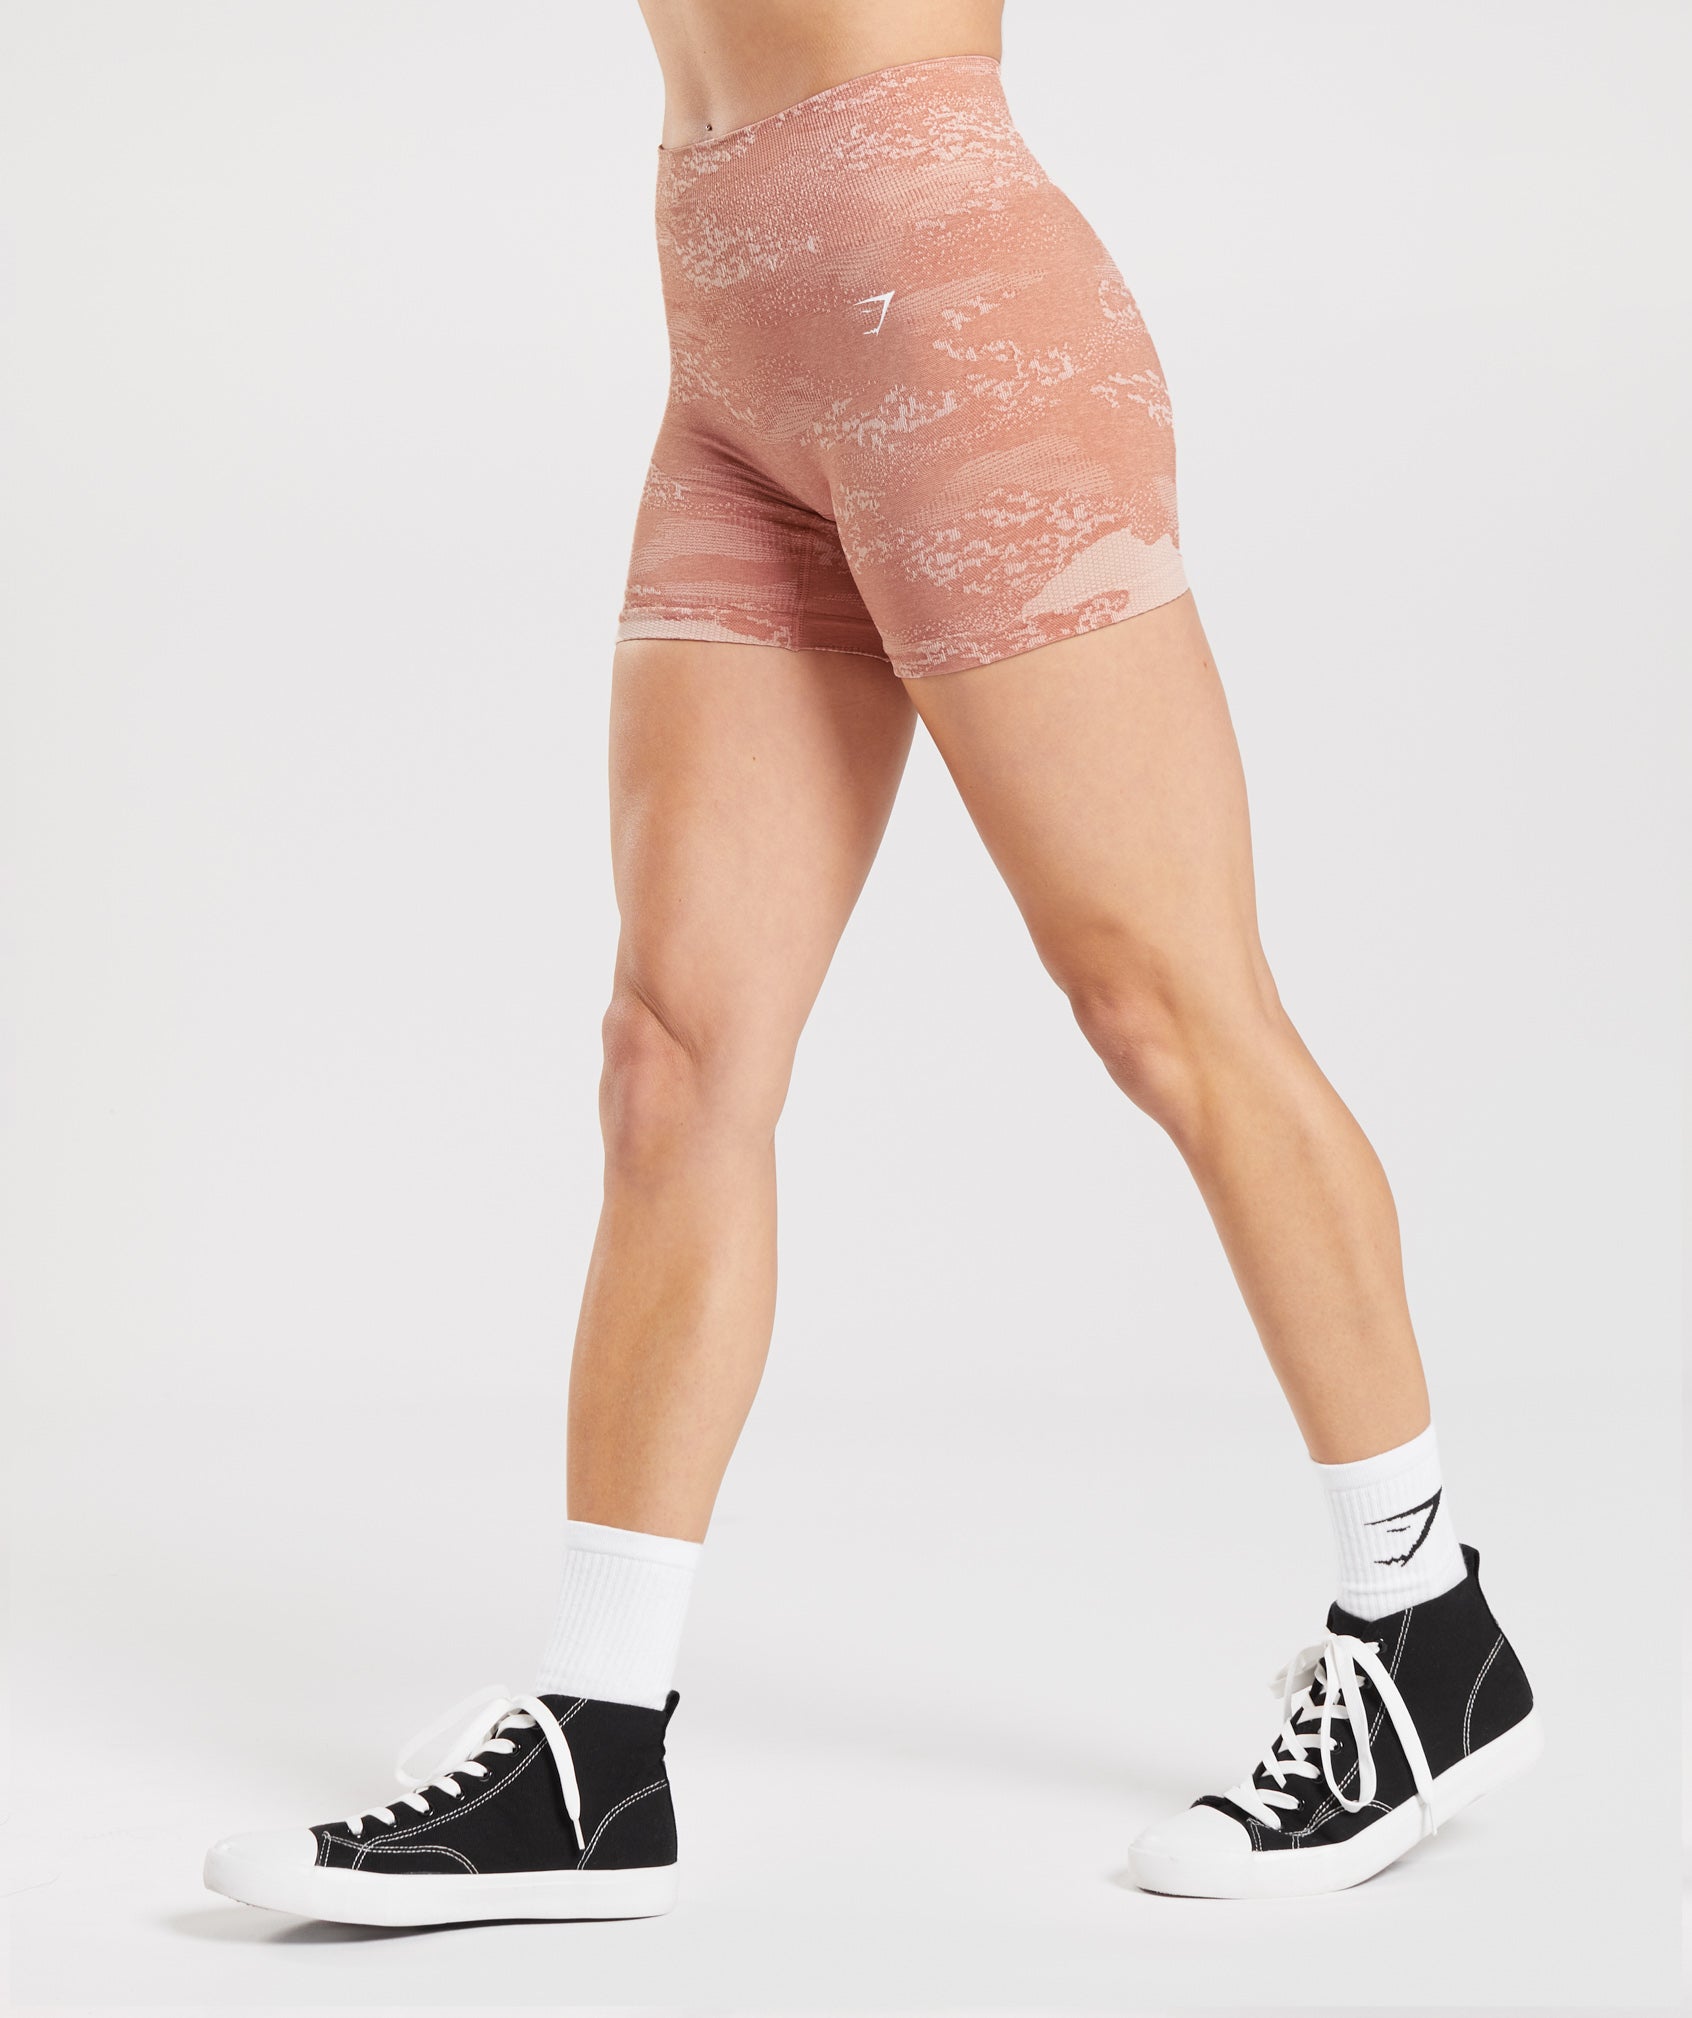 Adapt Camo Seamless Shorts in Misty Pink/Hazy Pink